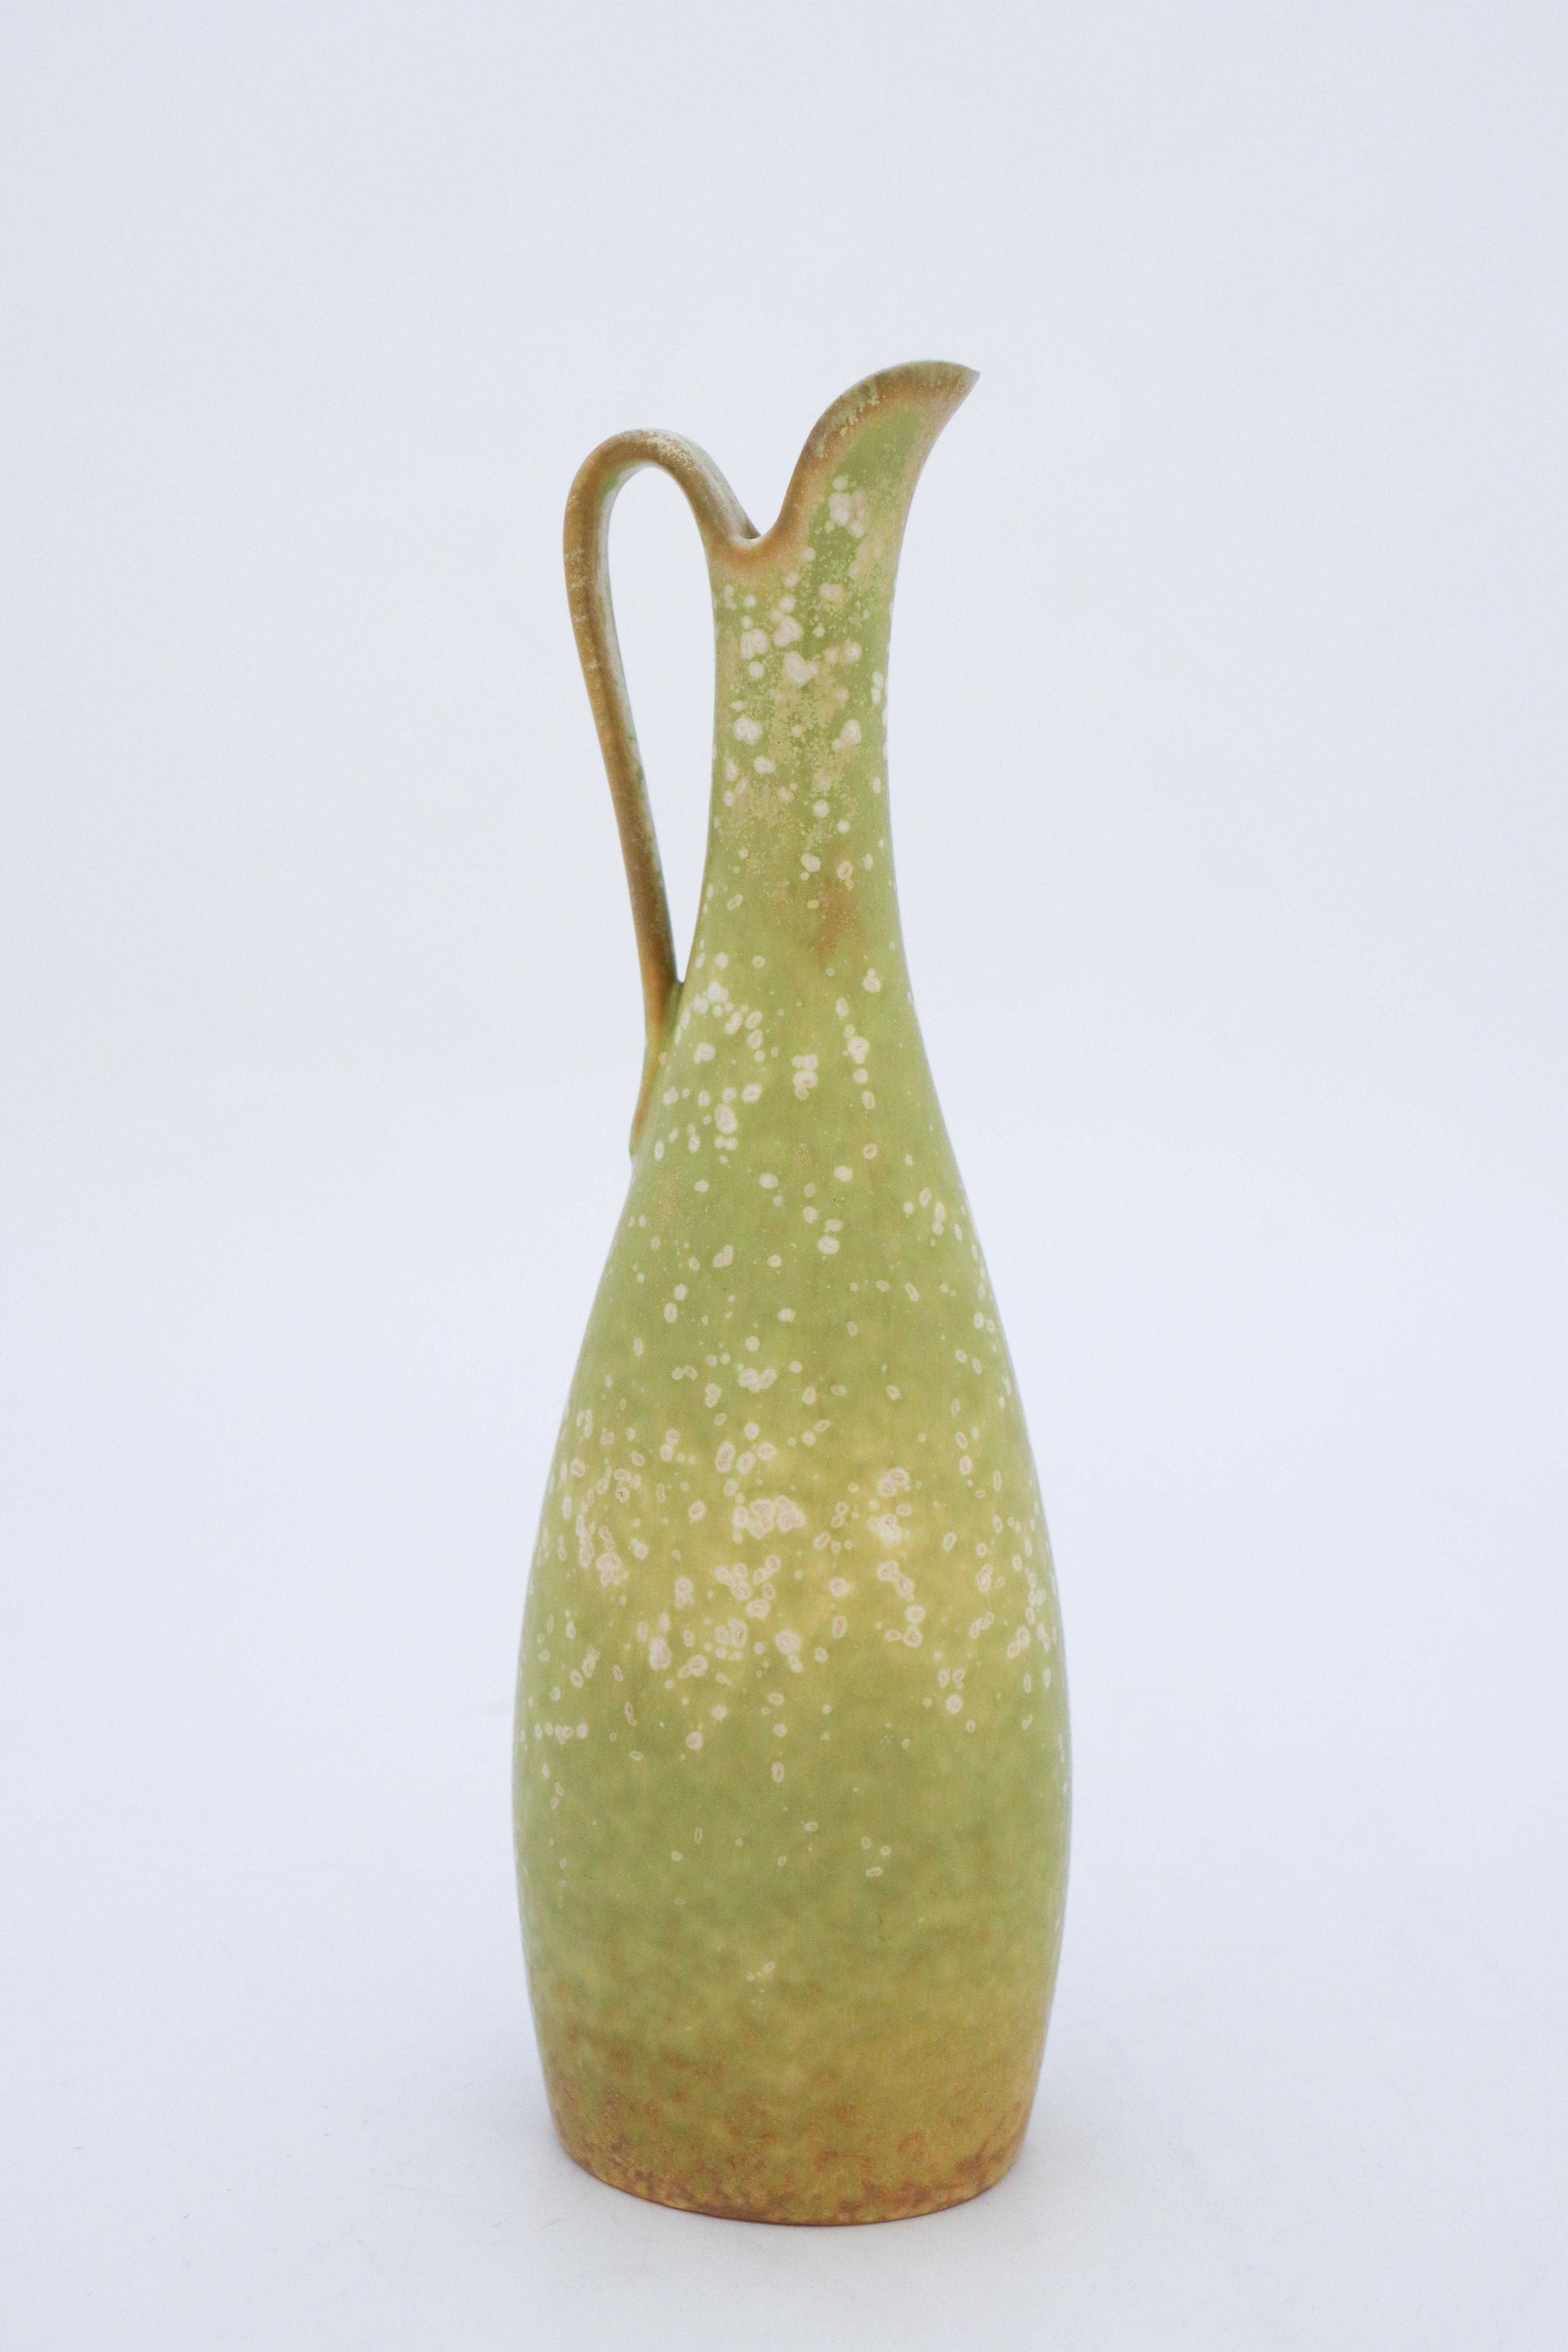 A lovely green vase with handle designed by Gunnar Nylund at Rörstrand, it´s 25 cm high and it has a lovely glaze, it´s in excellent condition and marked as 1st quality.

Gunnar Nylund was born in Paris 1904 with parents who worked as sculptors